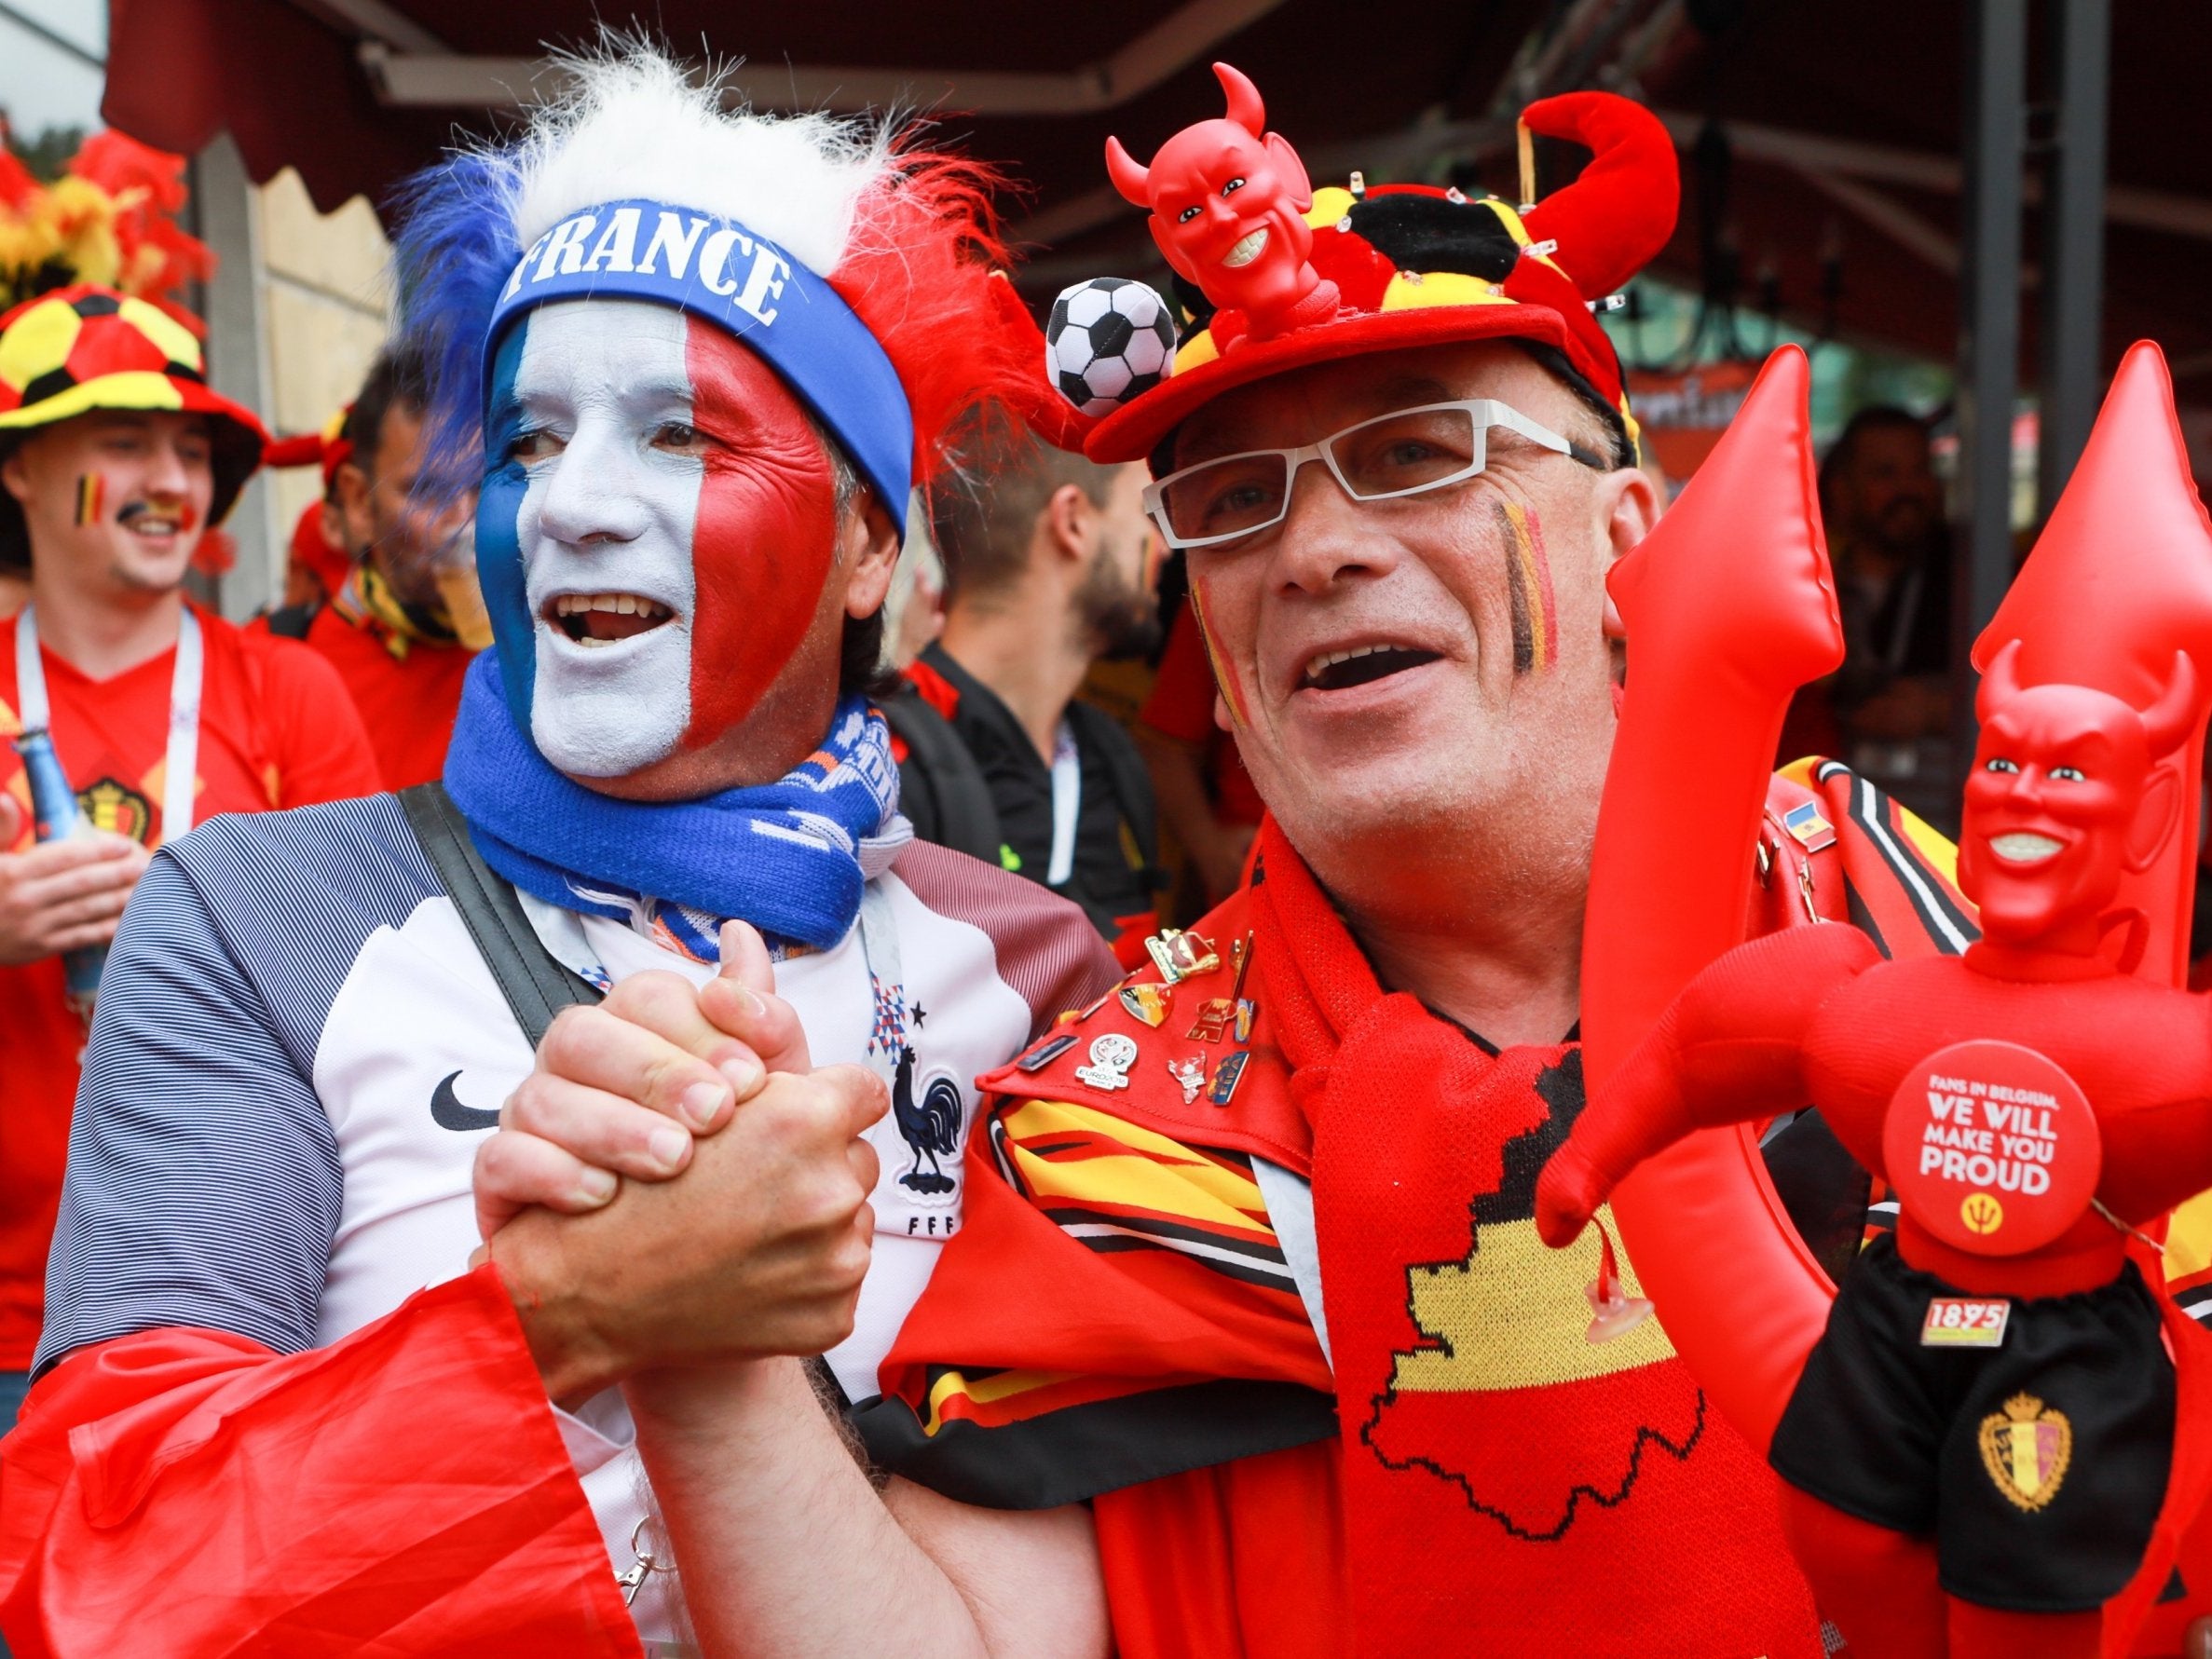 France vs Belgium LIVE World Cup 2018: Prediction, what TV channel, what time, how to watch online, team news, line-ups, head-to-head, past results, odds